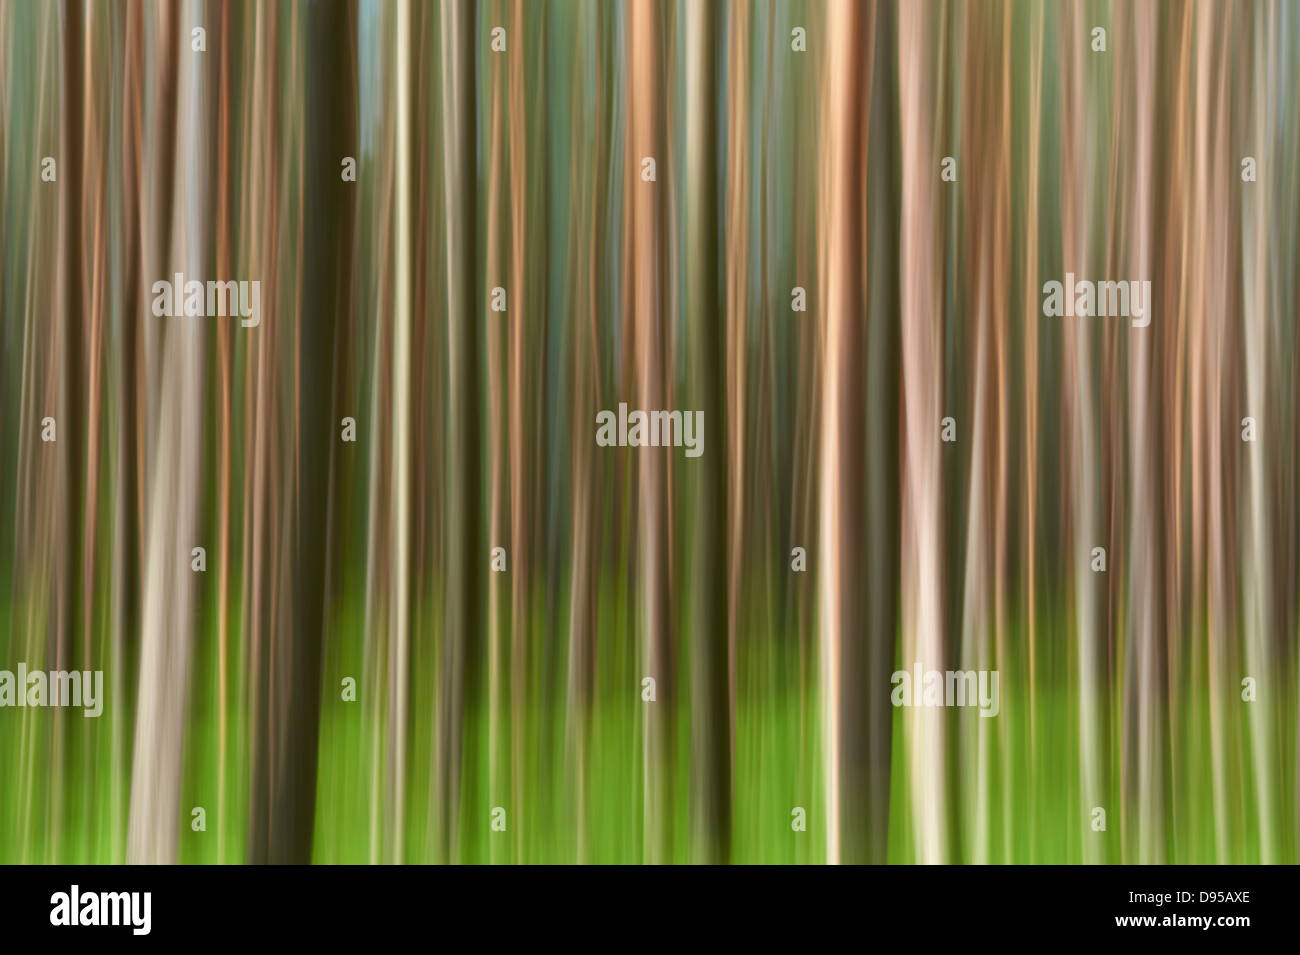 Abstract motion forest background. Green and brown texture. Artistic effect. Abstract nature. Stock Photo